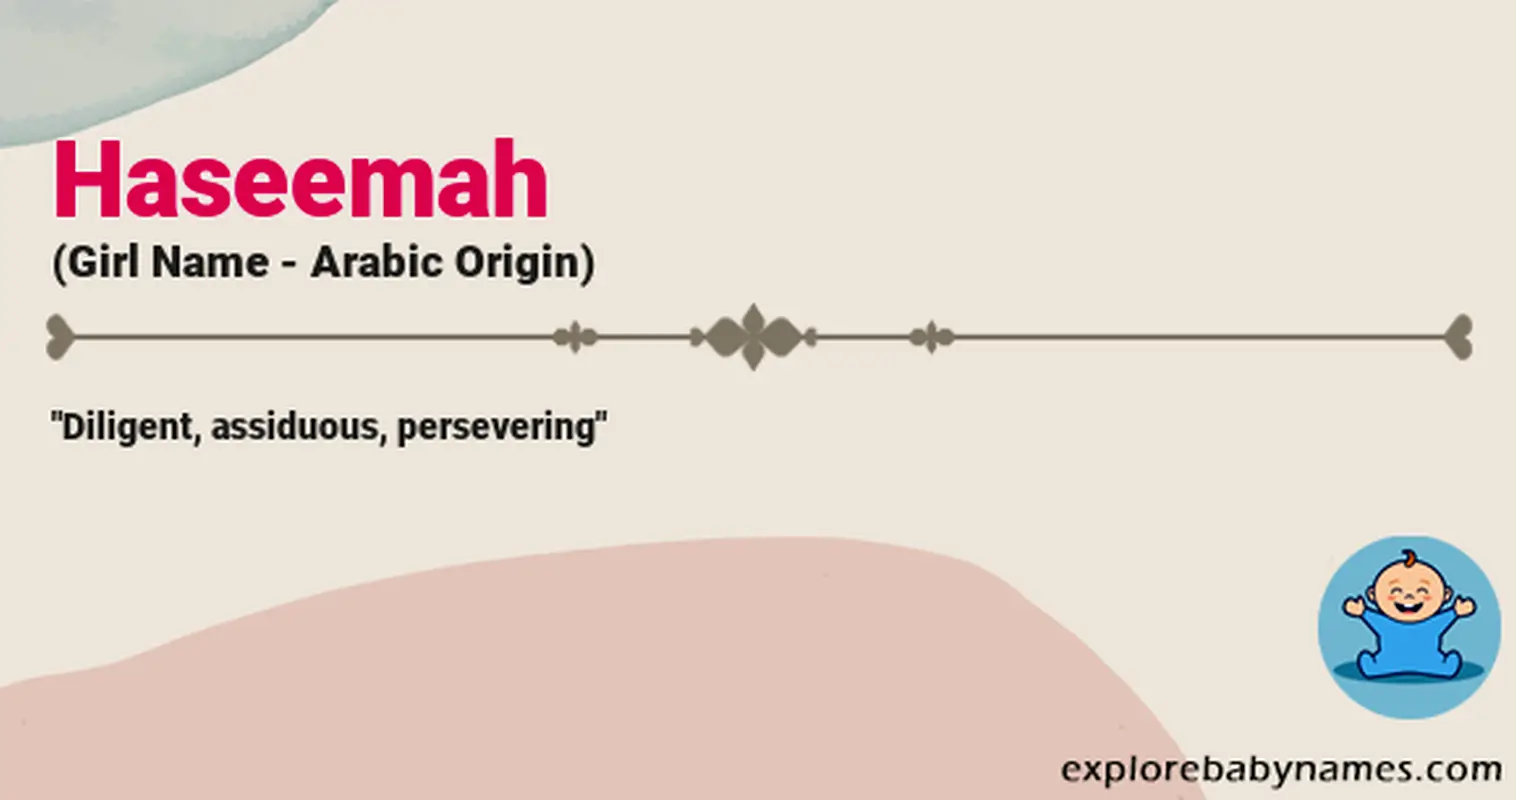 Meaning of Haseemah